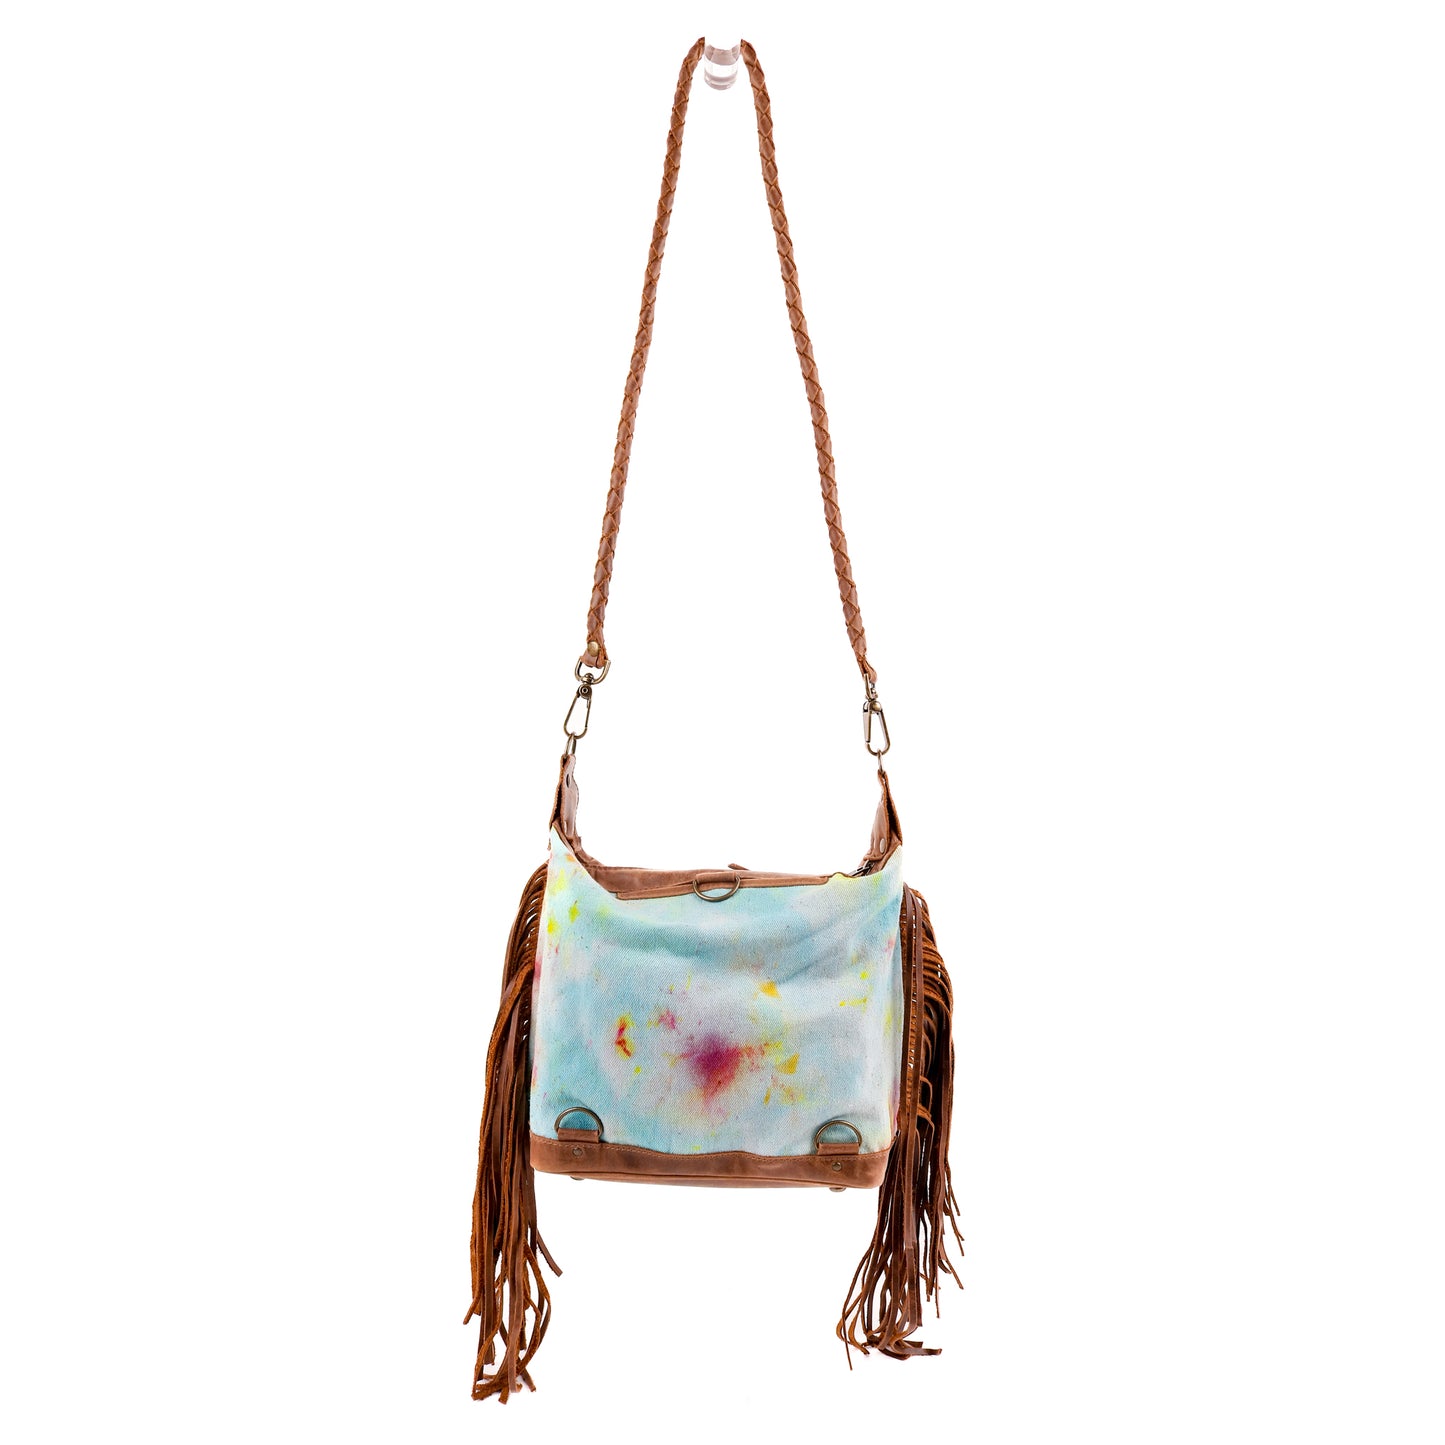 BEATRIZ MINI CONVERTIBLE DAY BAG WITH FRINGE - UPCYCLED DENIM - TIE DYE - CAOBA - NO. 10005